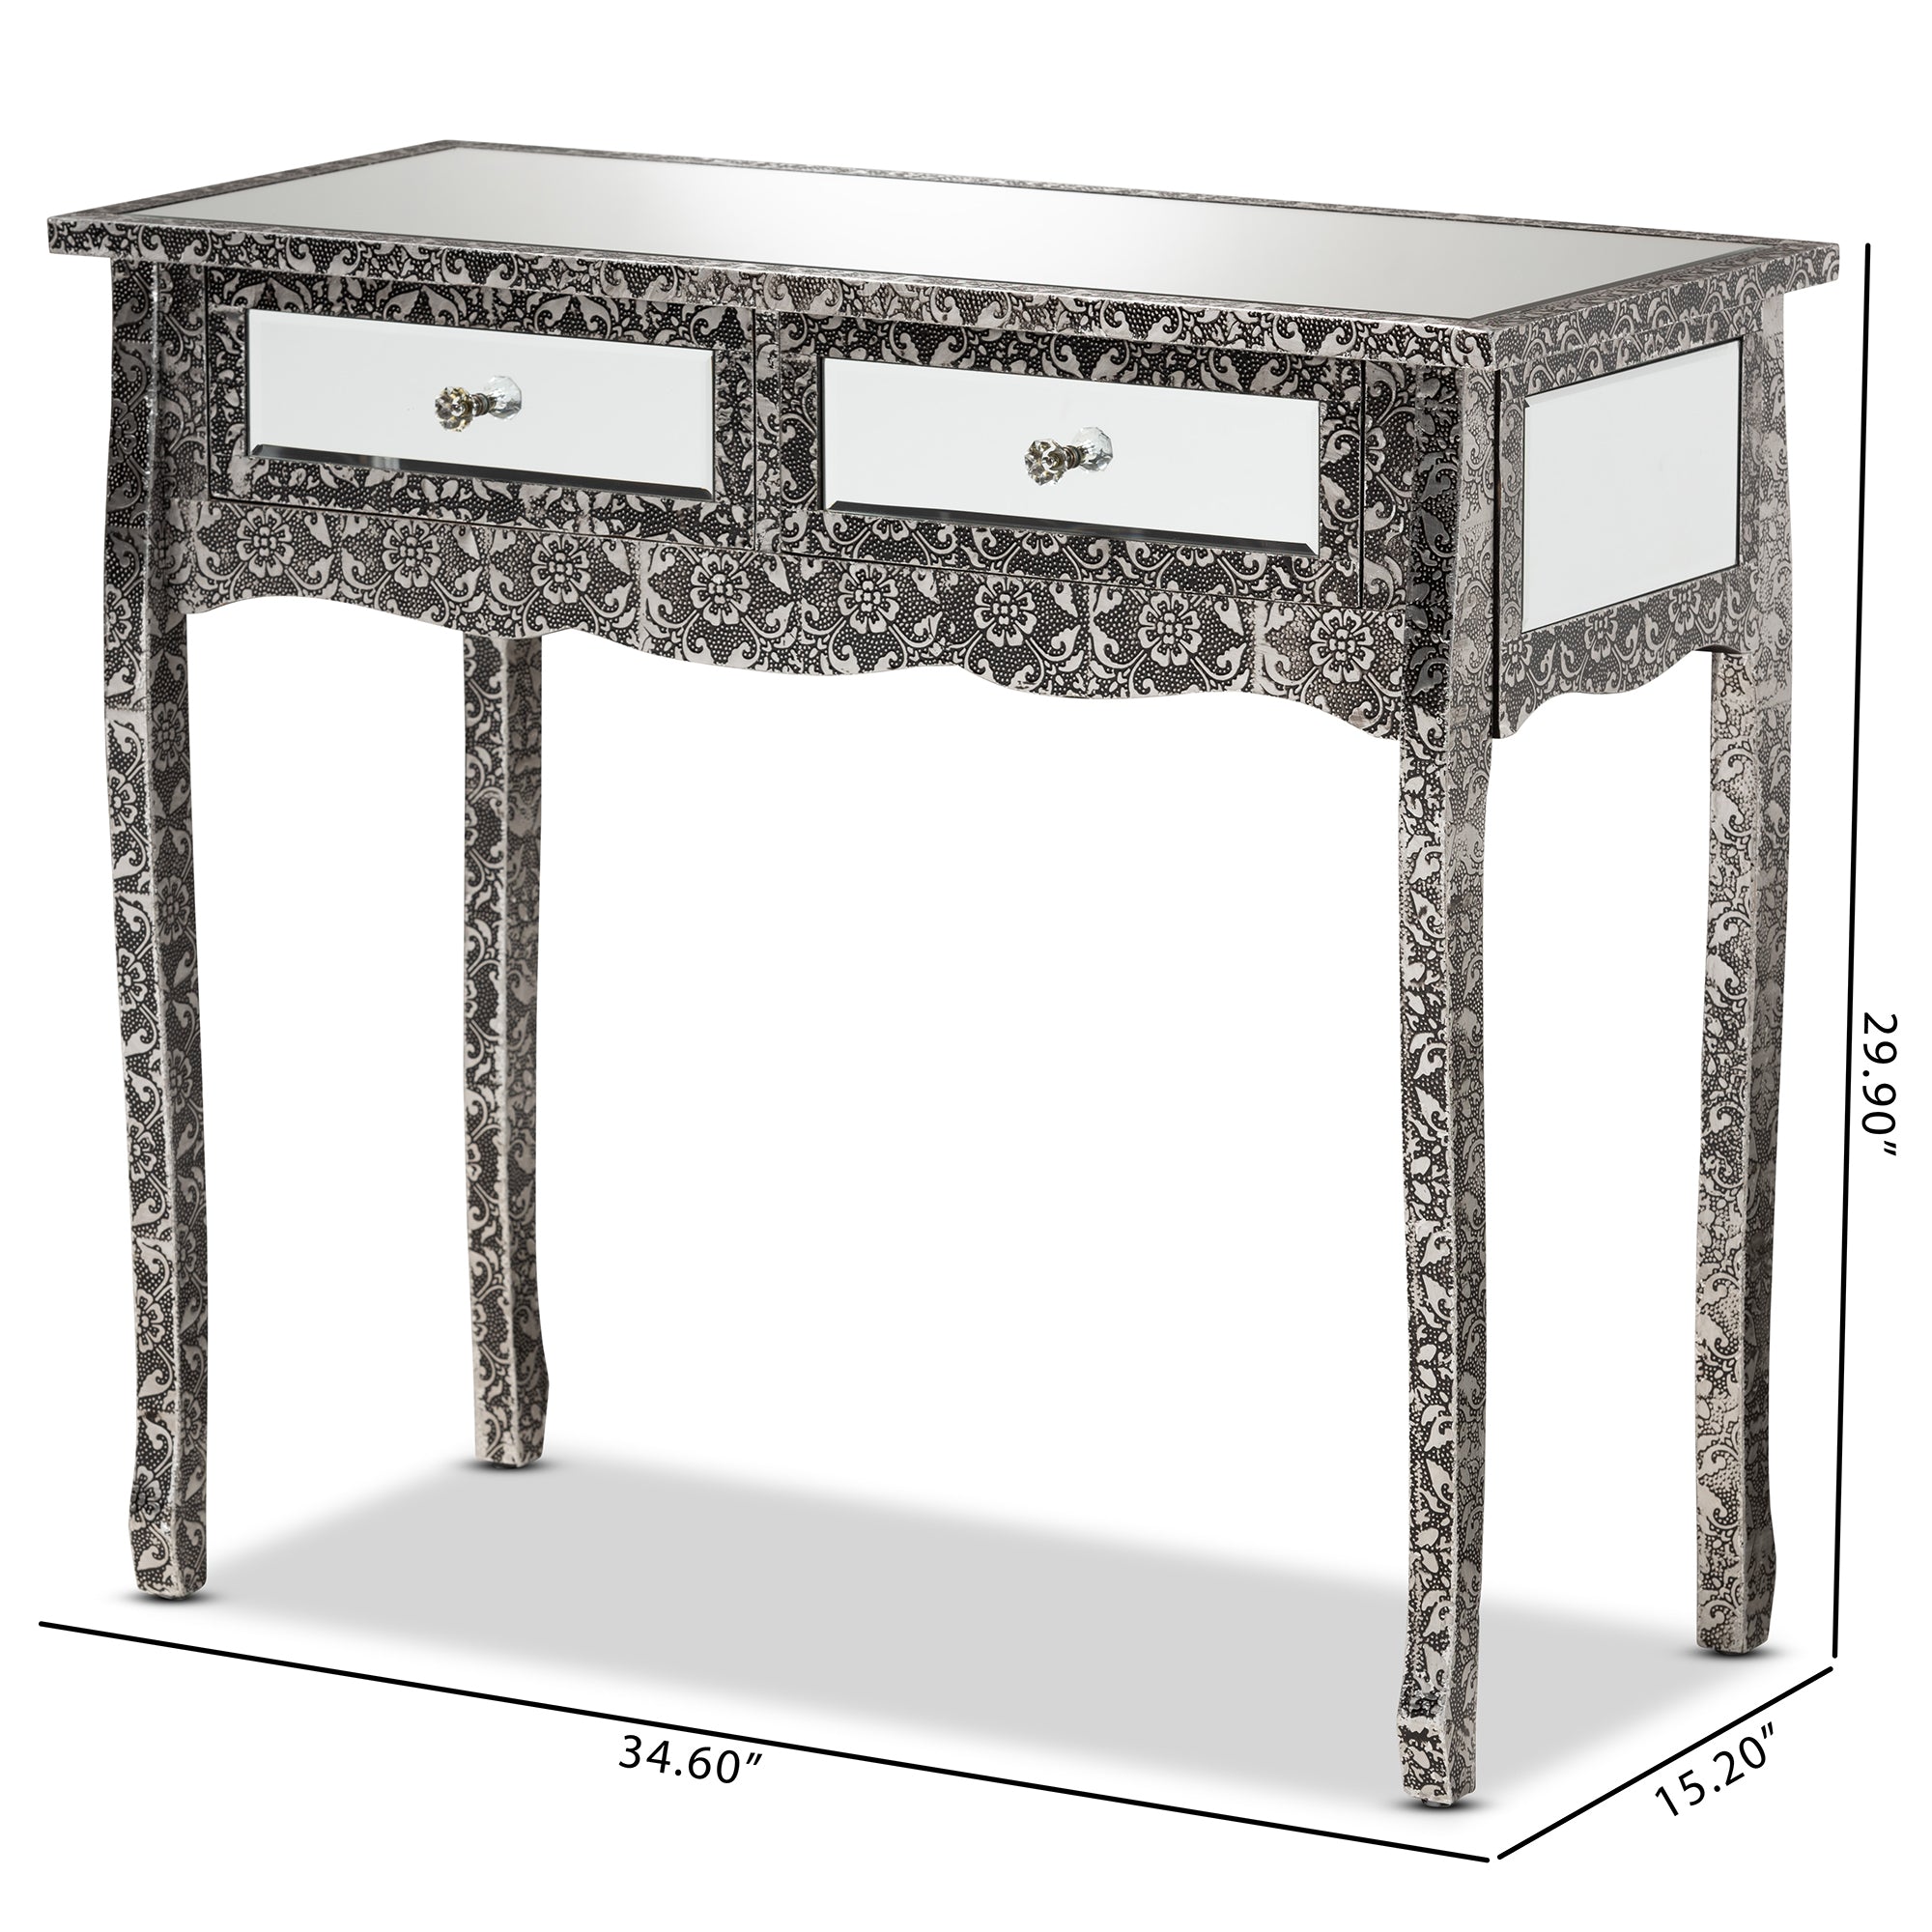 Wycliff Glamour Console Table 2-Drawer-Console Table-Baxton Studio - WI-Wall2Wall Furnishings